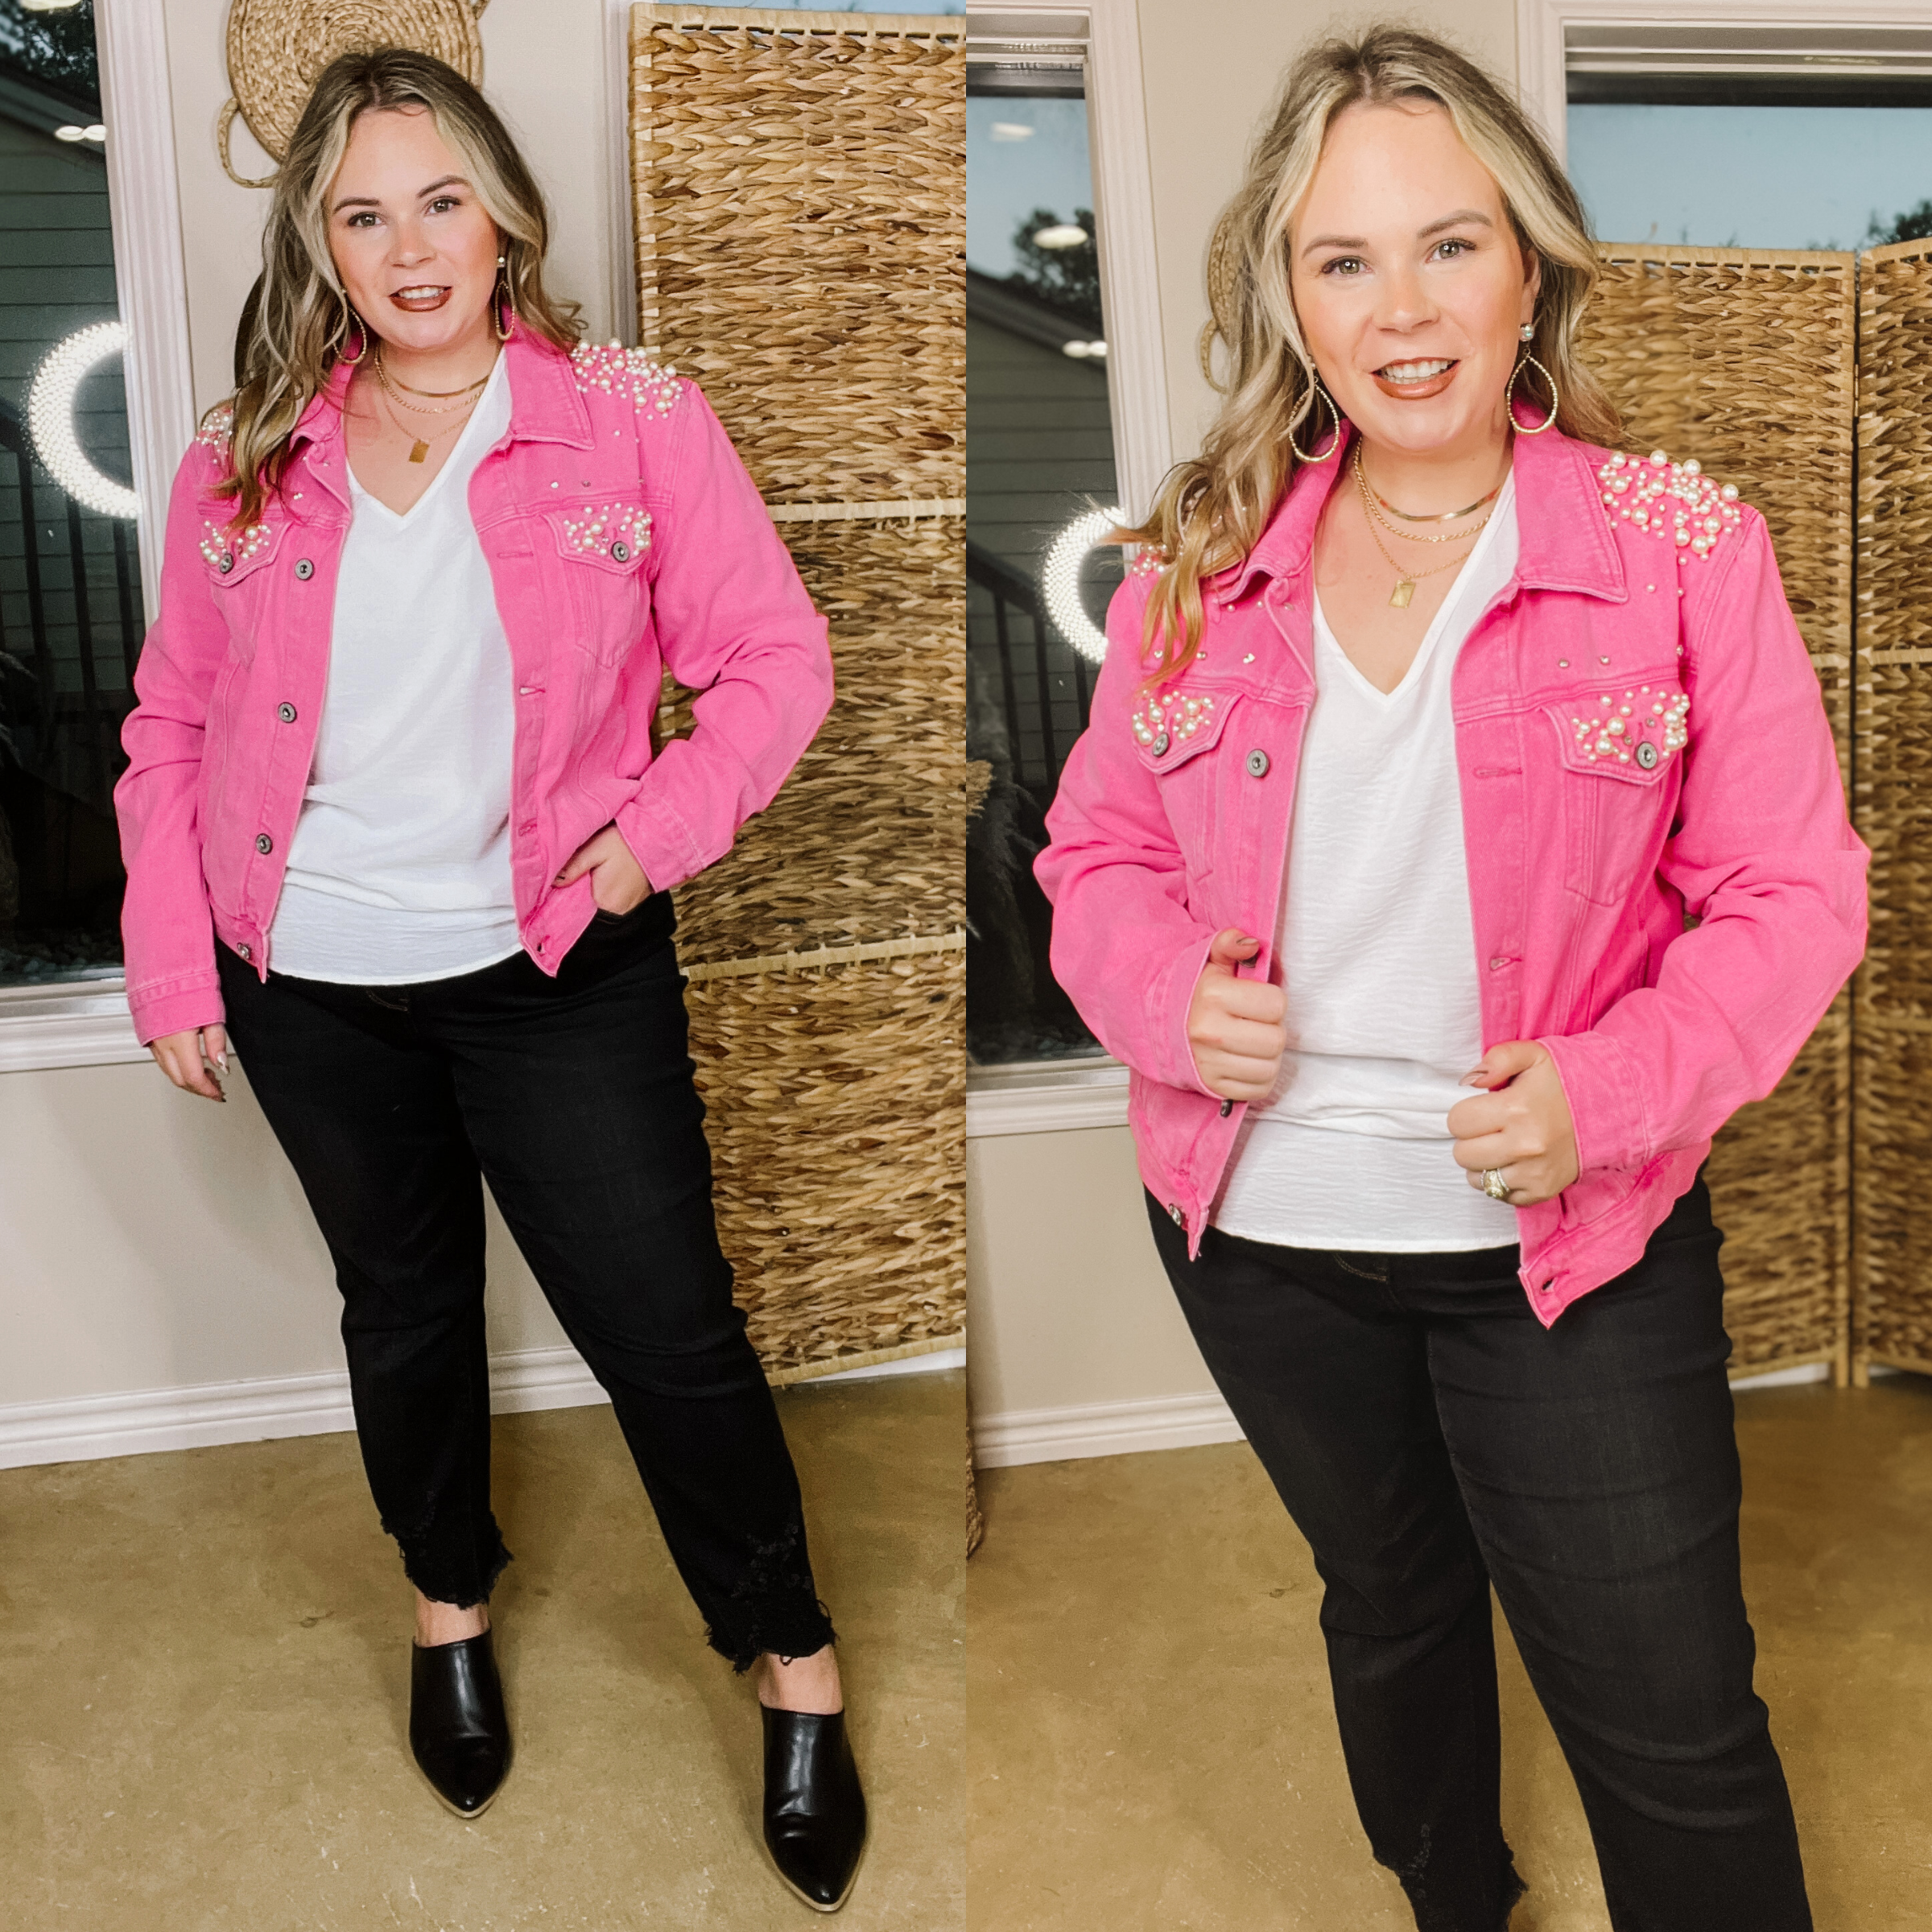 Model is wearing a pink denim jacket with various sizes of pearls alongside the shoulder and pockets. Model has a white undershirt, black skinny jeans, black mules, and gold jewelry.  Bakckground is hues of brown and white. 